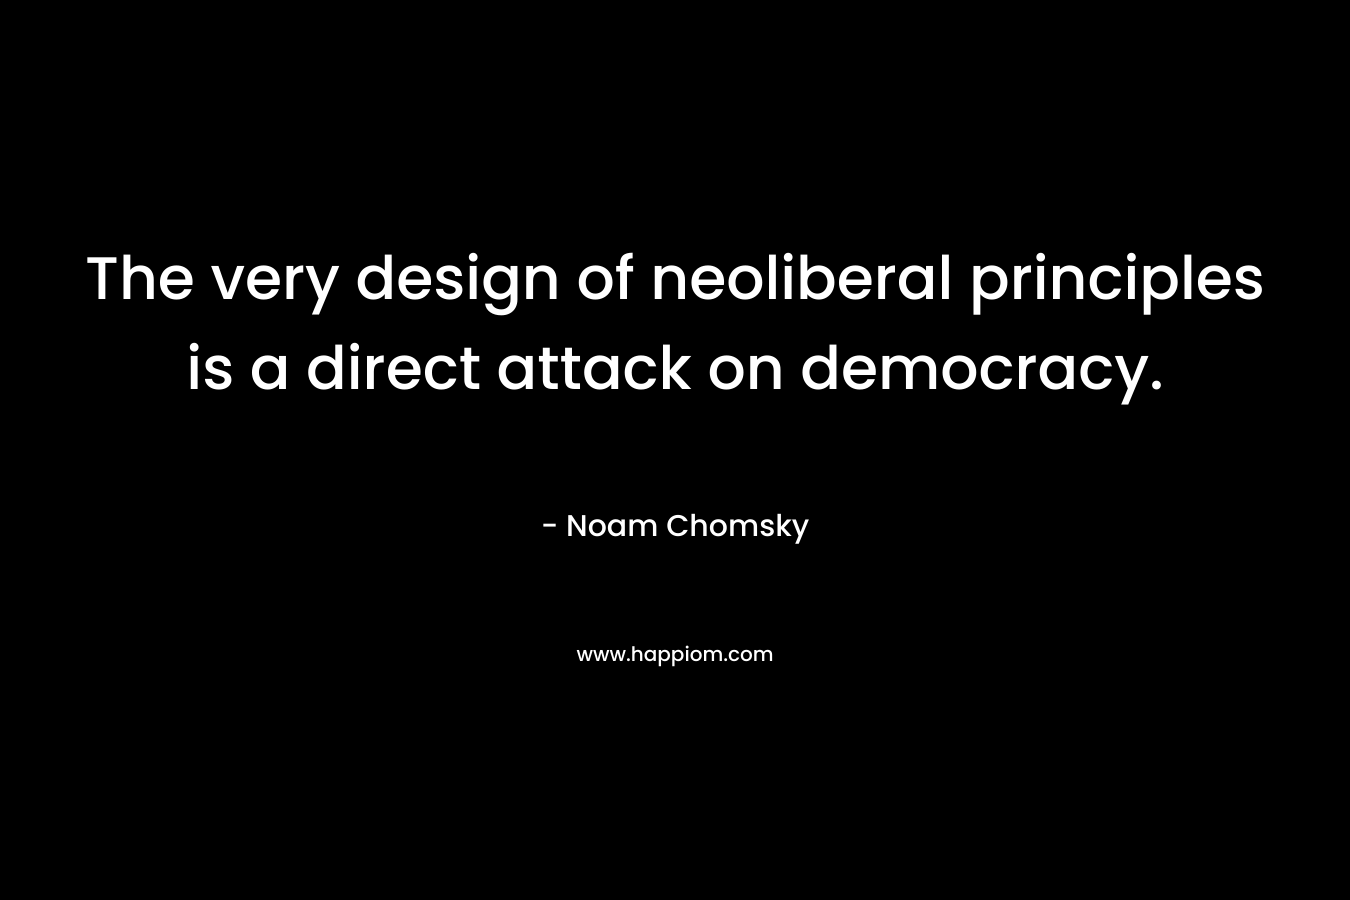 The very design of neoliberal principles is a direct attack on democracy. – Noam Chomsky